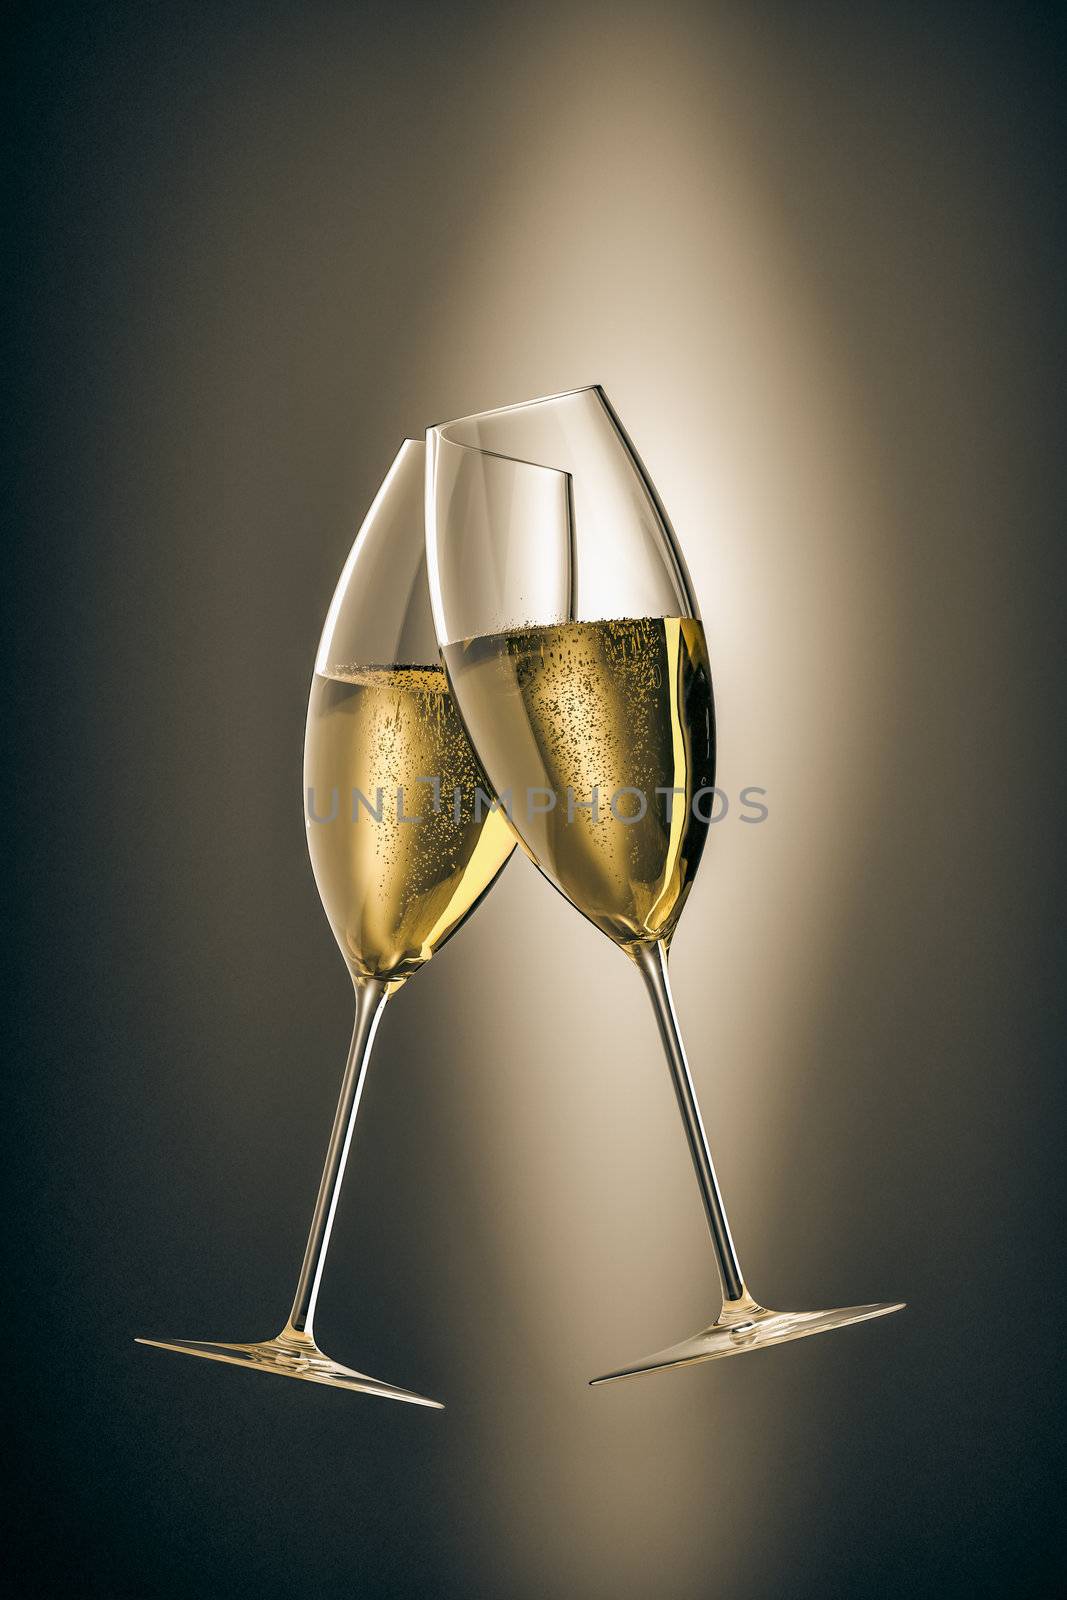 An image of two glasses of sparkling wine